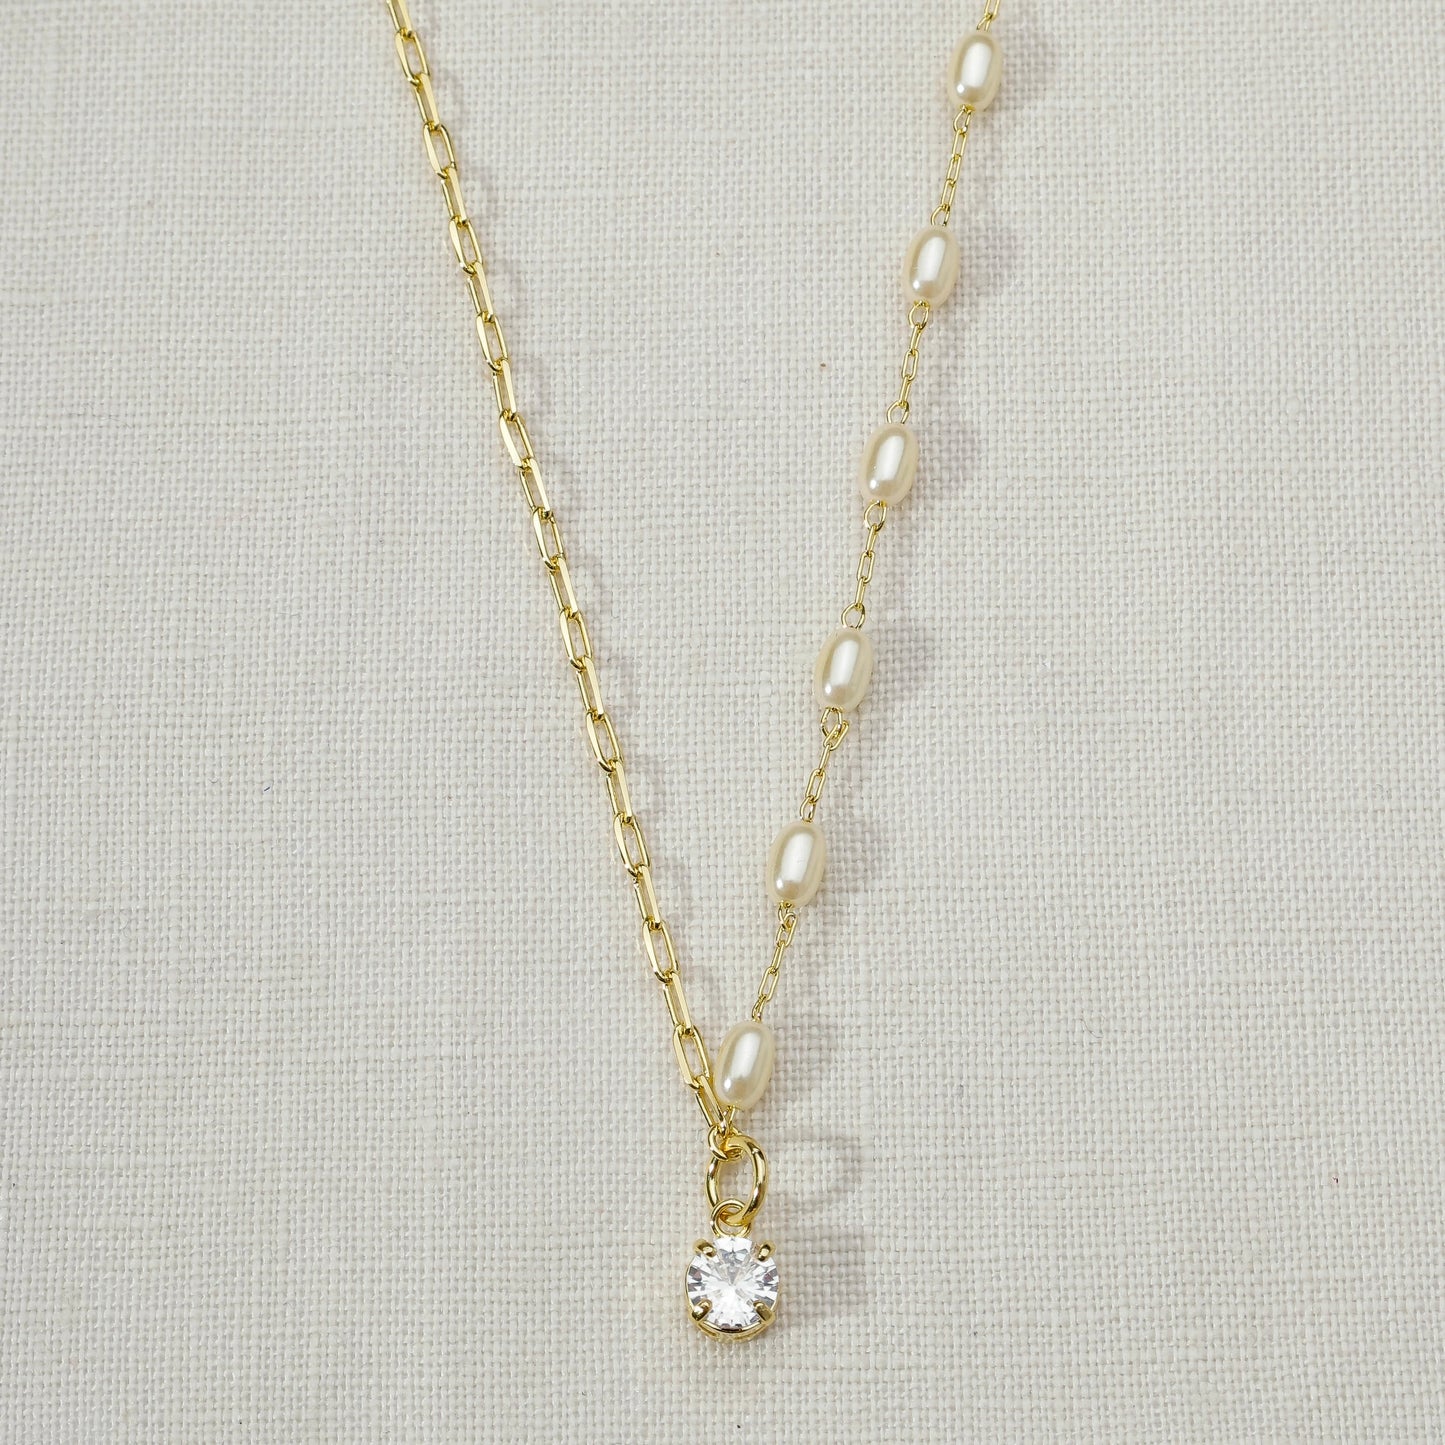 18k Gold Filled Oval Shaped Pearl Necklace With Cubic Zirconia Stone Charm